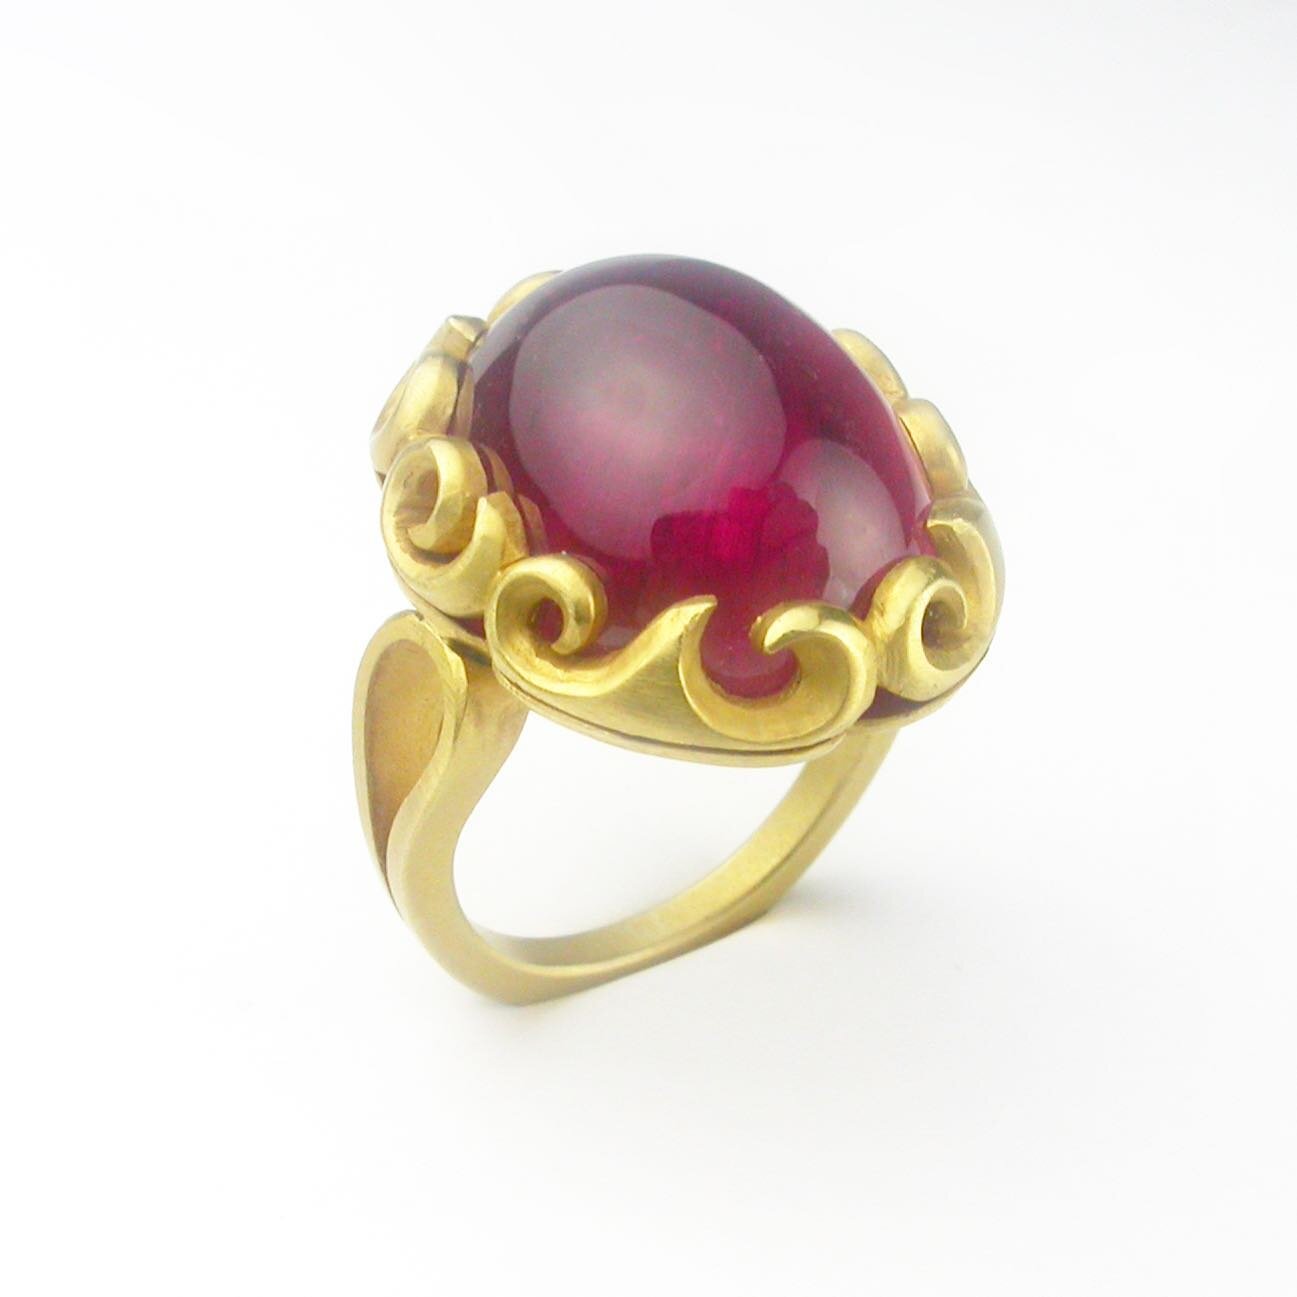 Beautiful rubellite tourmaline in gold carved mount. What a stone!
.
.
#tourmaline #ring #rings #ringoftheday #neverenoughrings #jewelry #jewellery #jewelrygram #jewellerygram #finejewelry #finejewellery #jewelrydesign #jewellerydesign #jewelrylover 